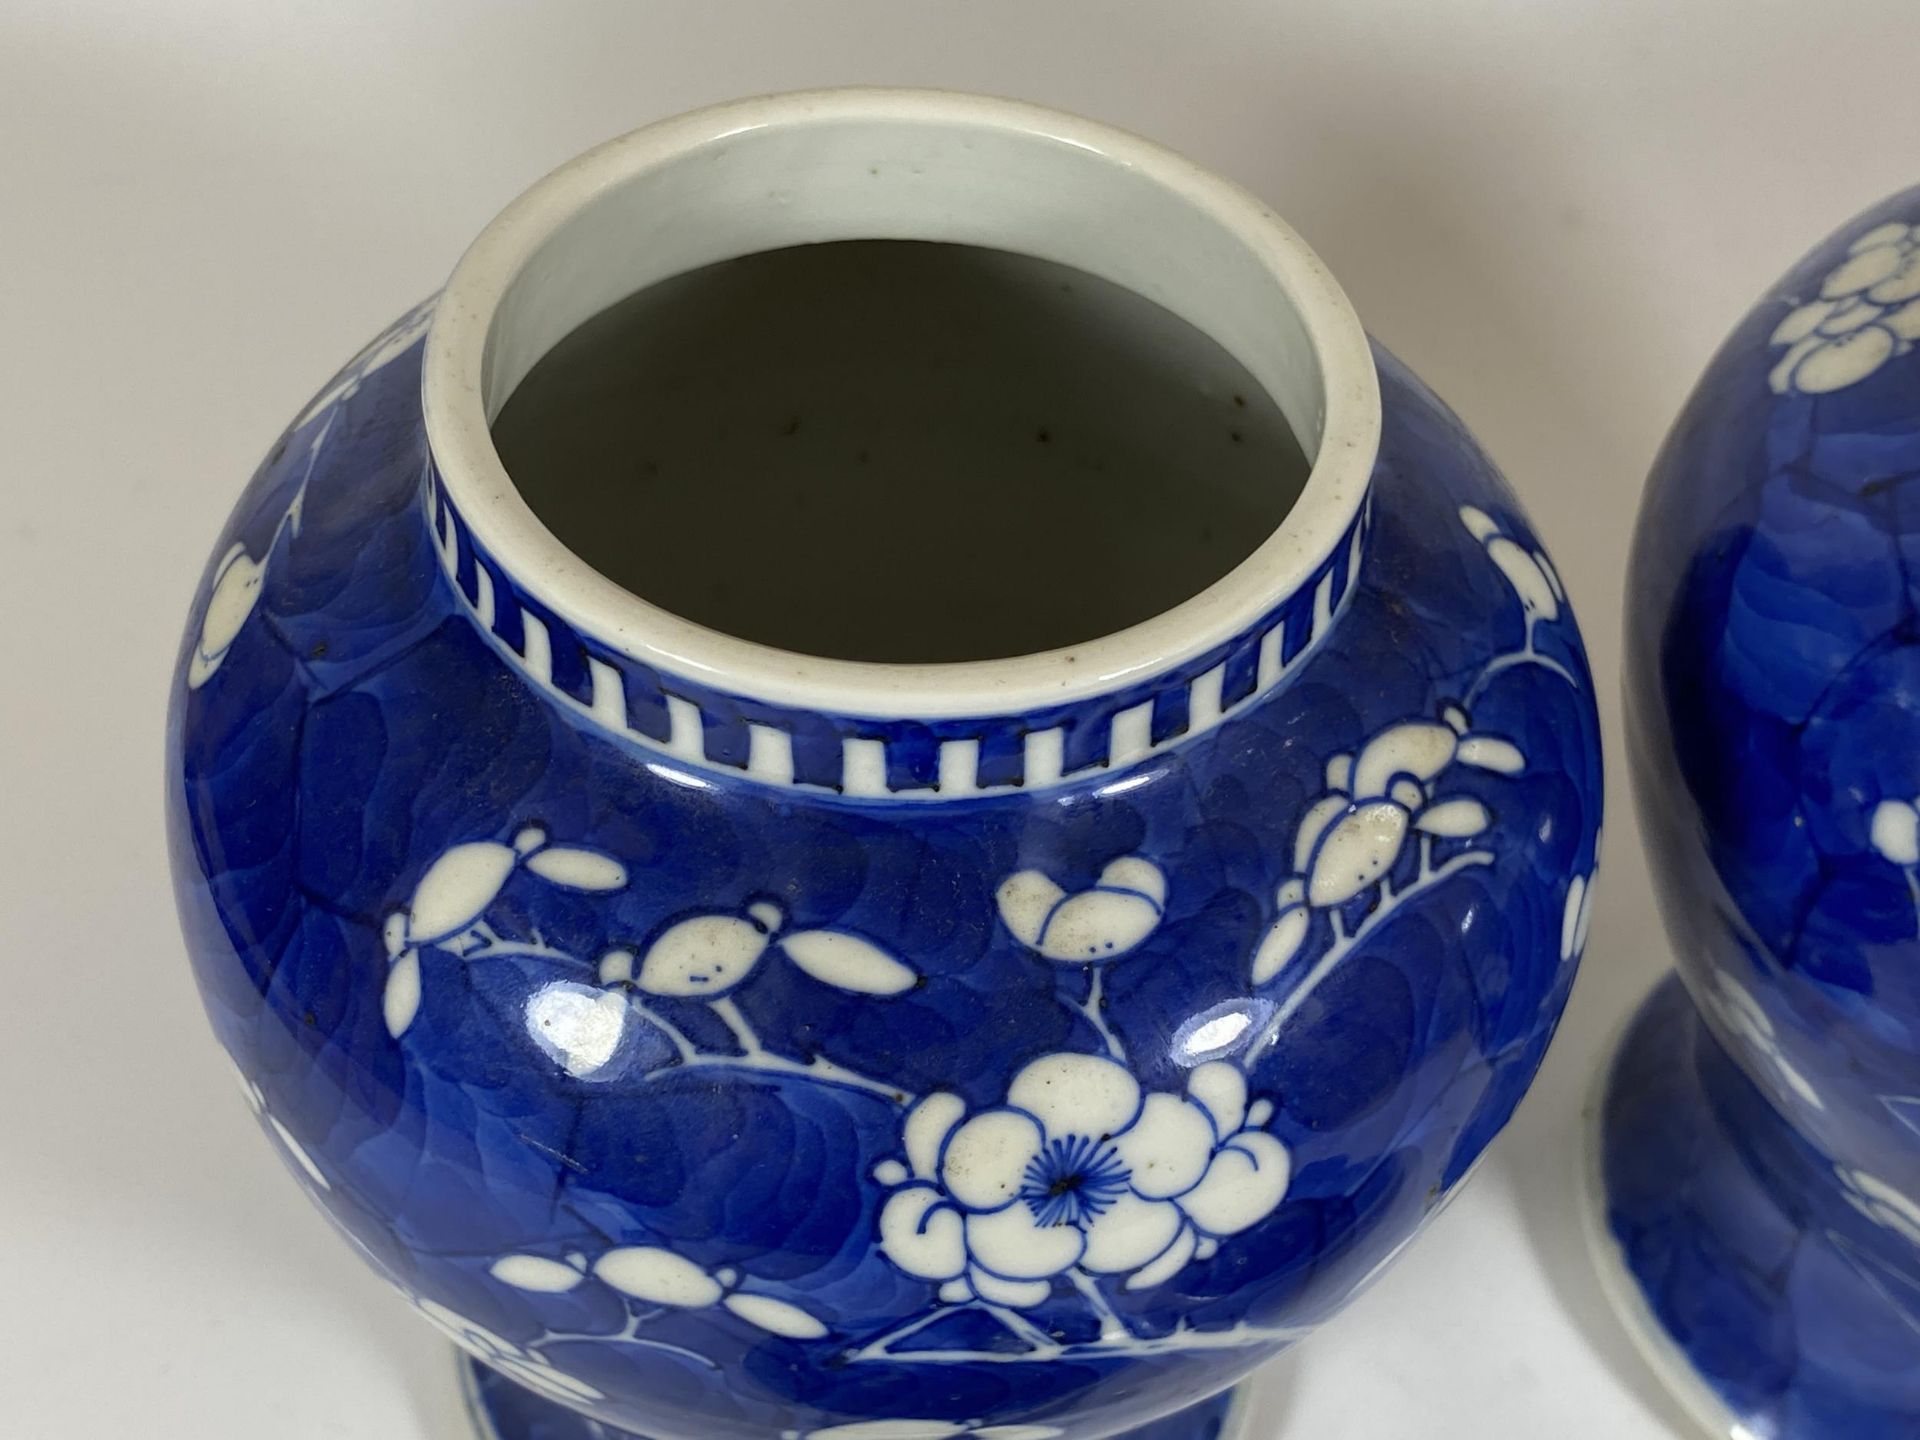 A PAIR OF 19TH/20TH CENTURY CHINESE BLUE AND WHITE PRUNUS BLOSSOM PATTERN PORCELAIN LIDDED TEMPLE - Image 5 of 11